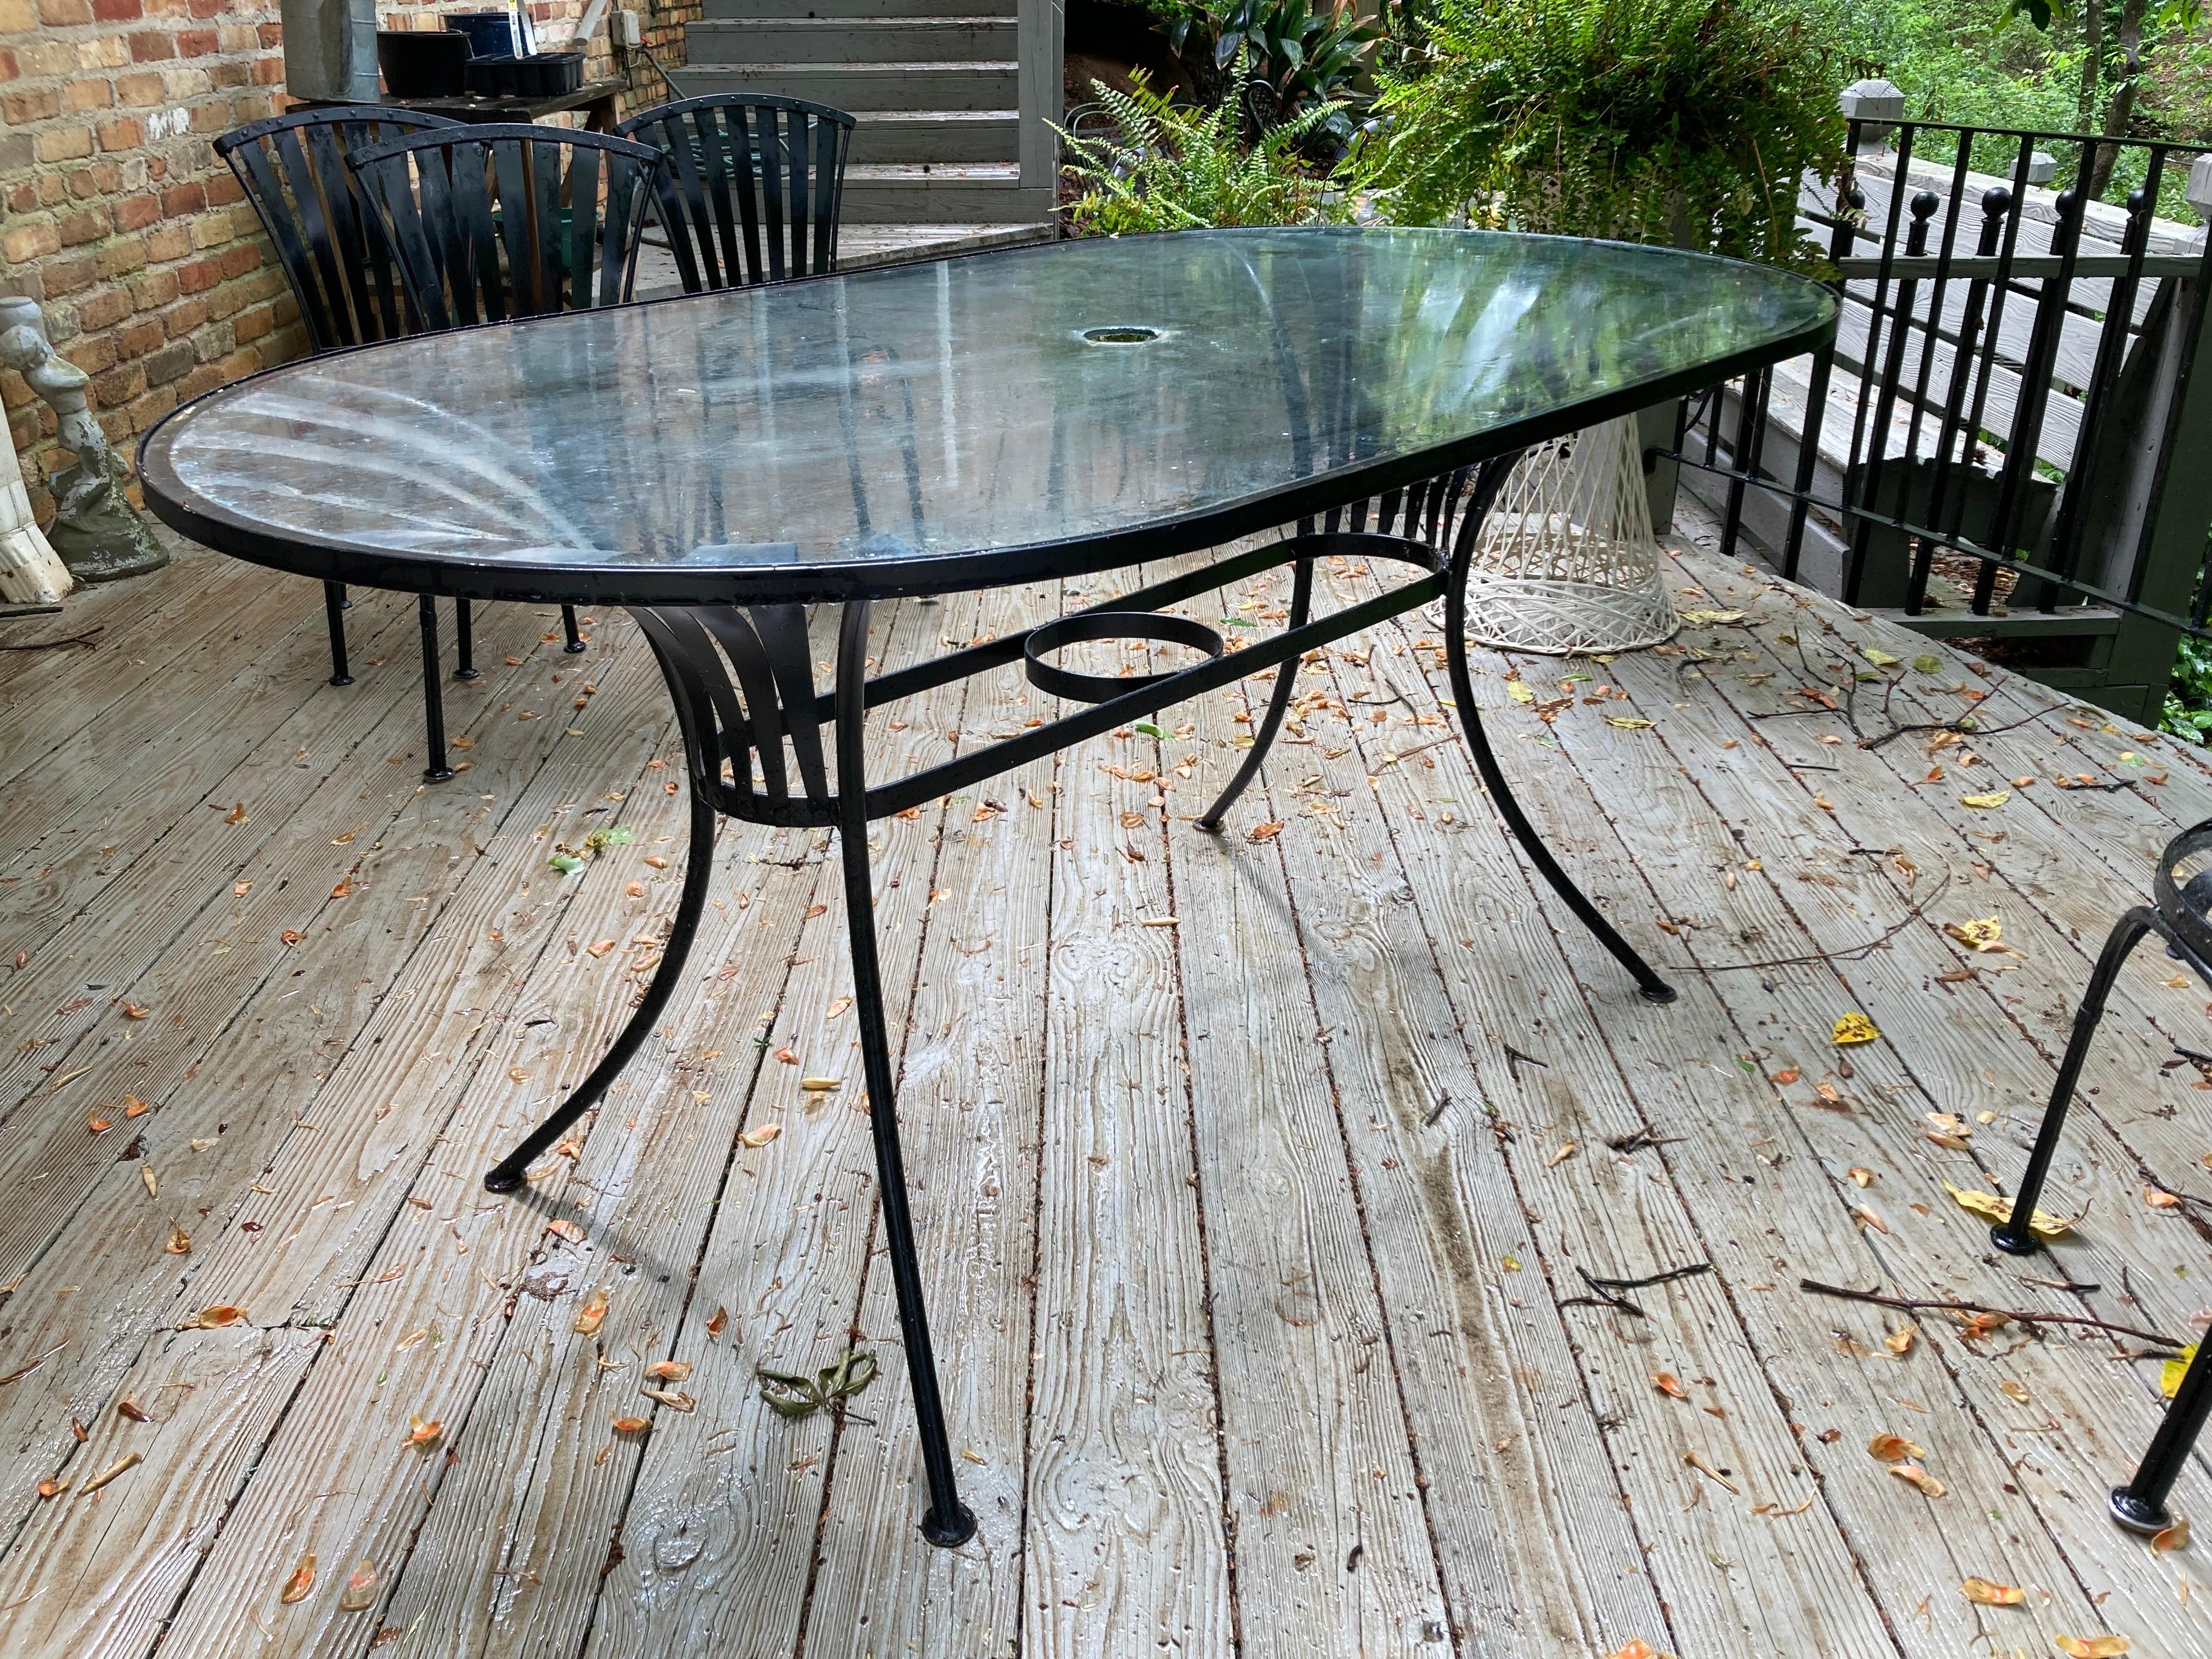 in near mint condition, lived most of their lives in a carolina coastal home on a screened in porch.

table is 60 wide, 33.5 deep and 30 tall

glass has umbrella hole, client can purchase protective ring at any patio store based on the size of your